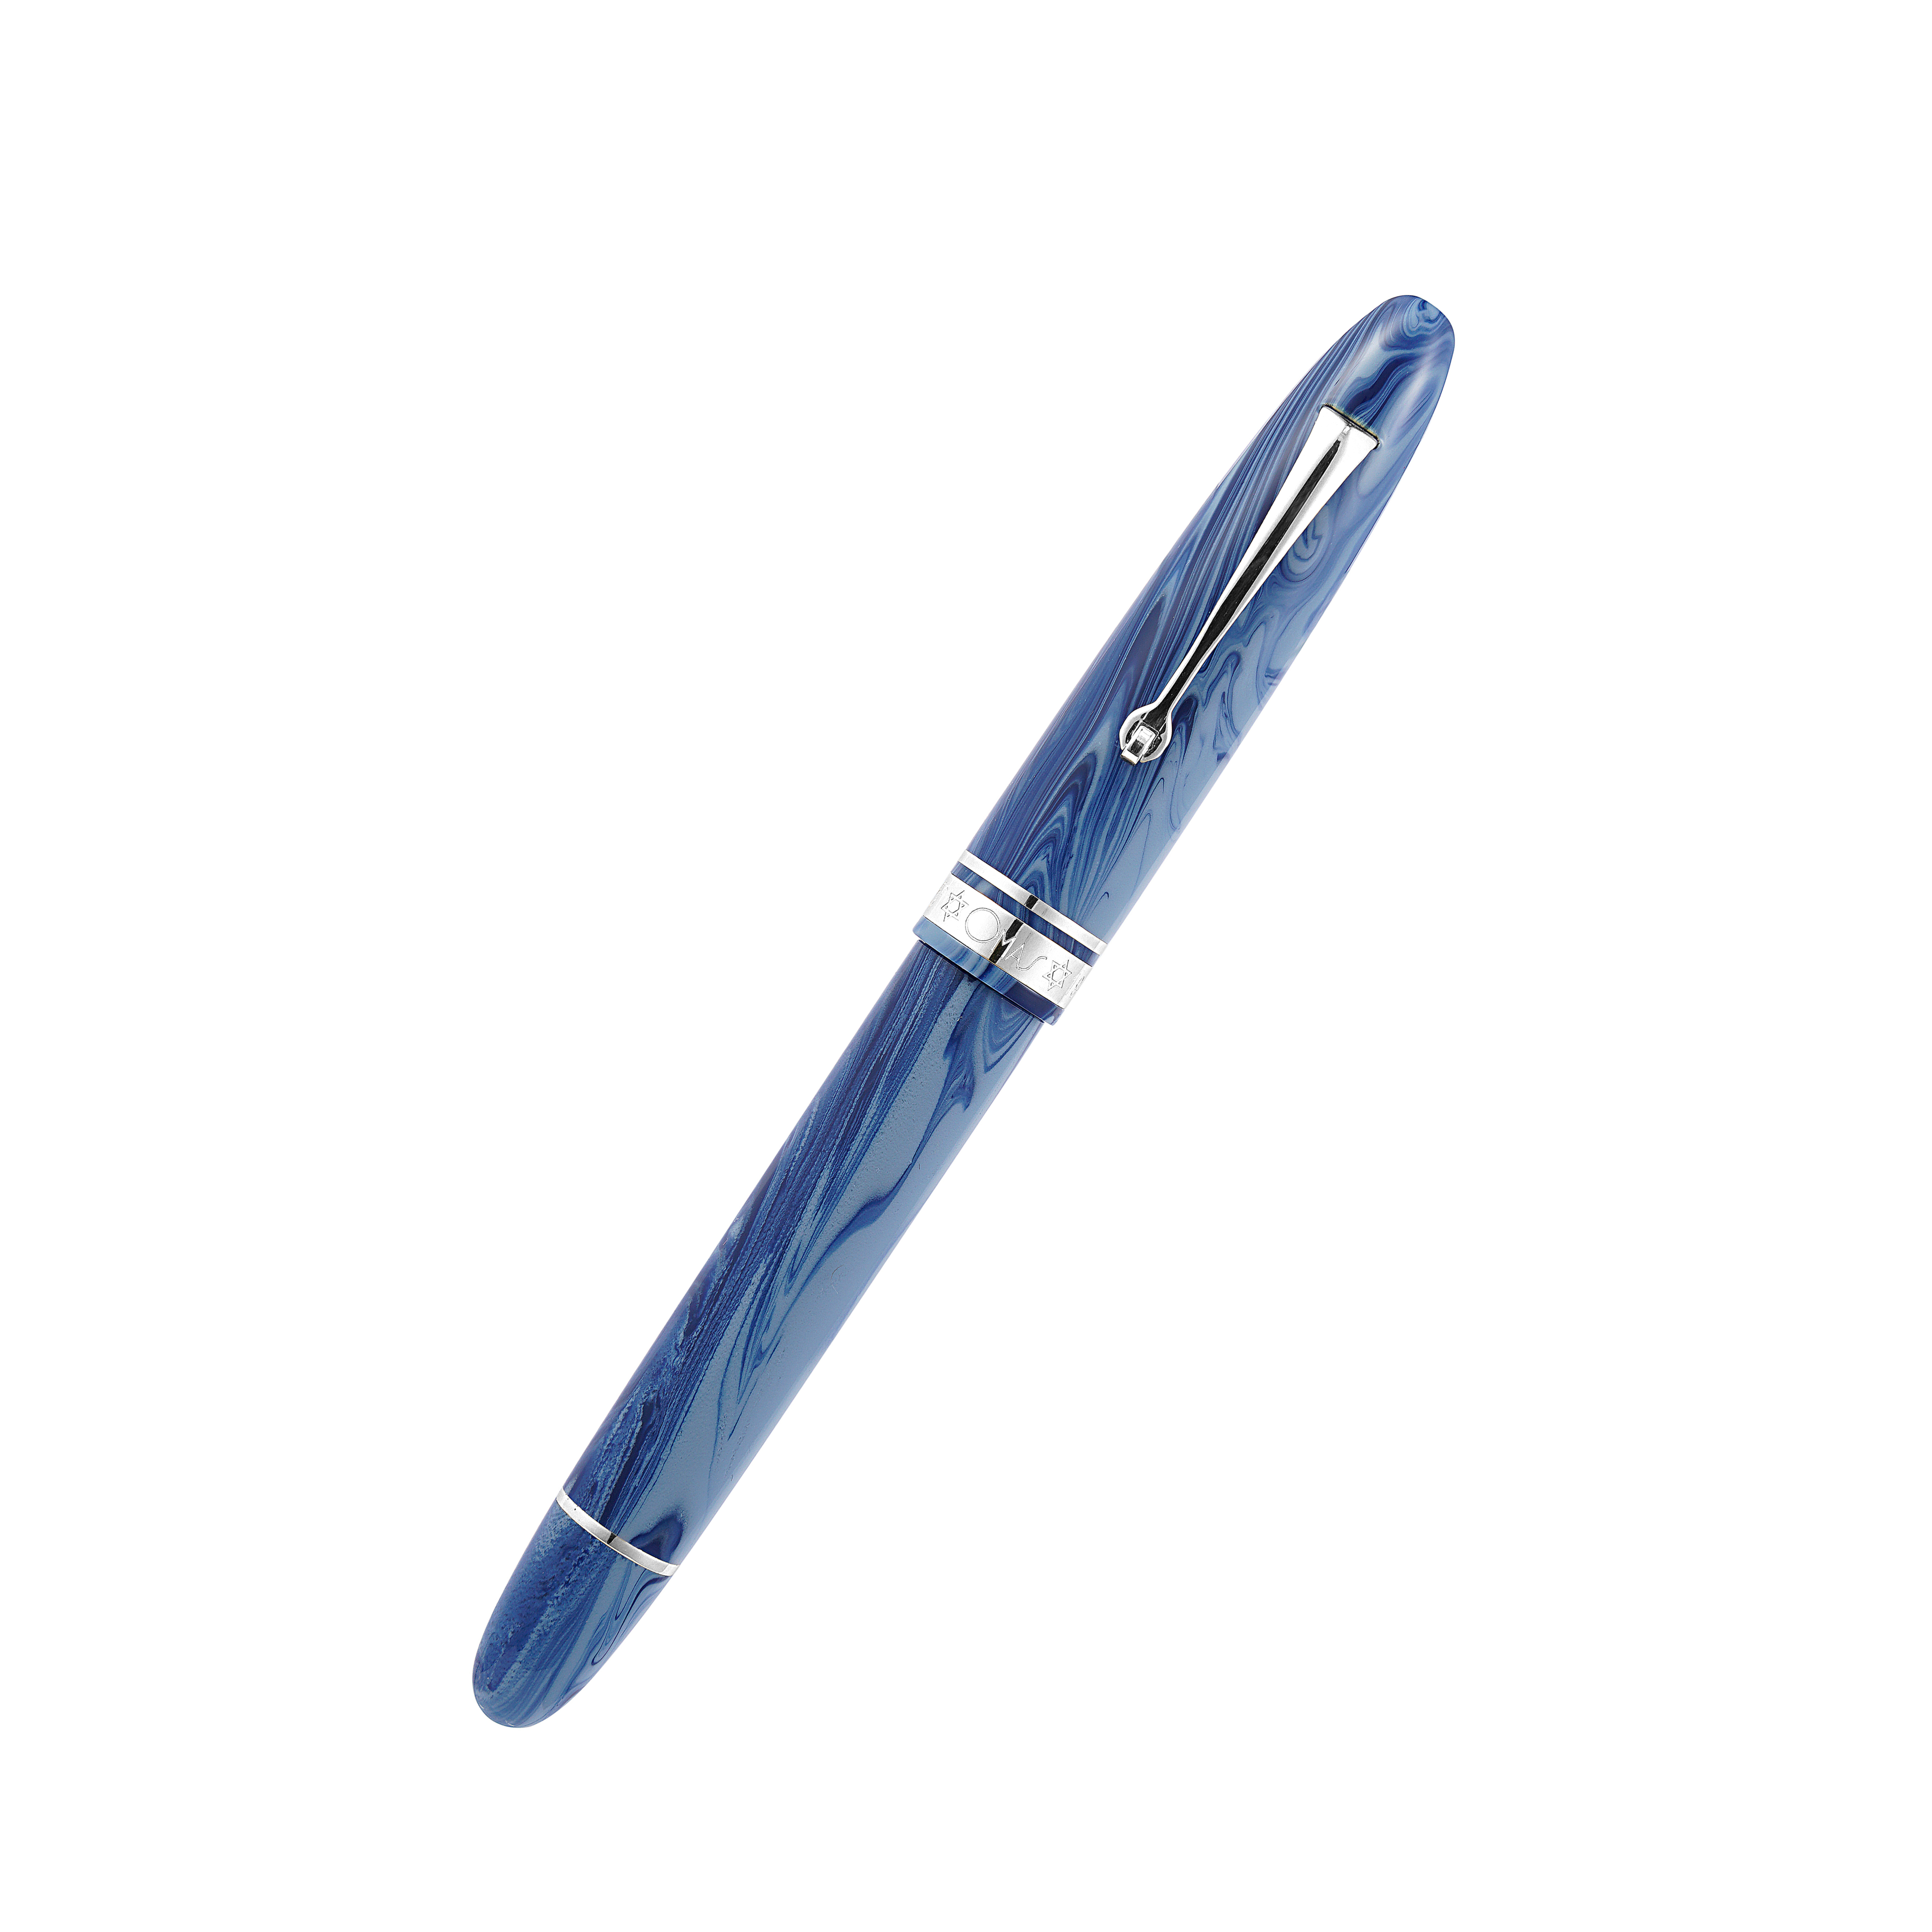 OMAS Ogiva Israel Limited Edition Fountain Pen with Silver Trim